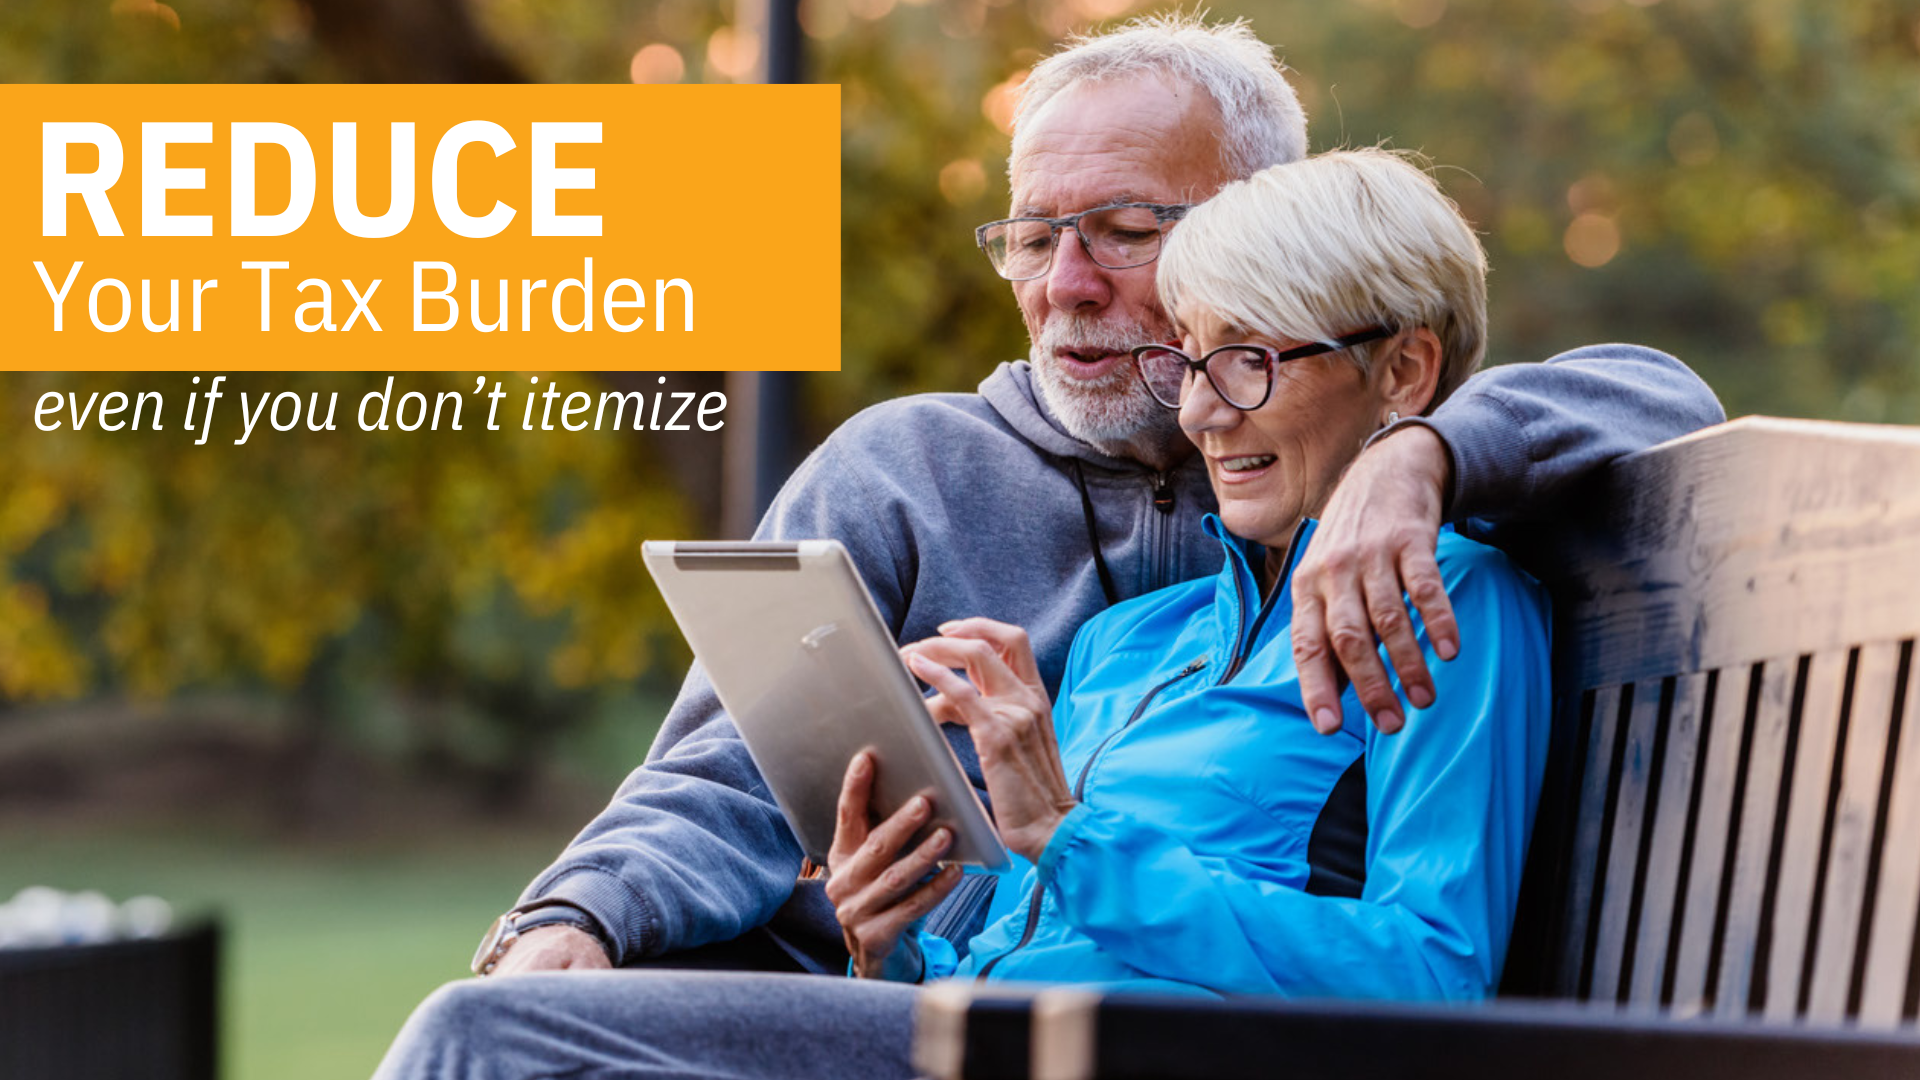 Elderly couple looking at tablet with text "Reduce your tax burden even if you don't itemize"